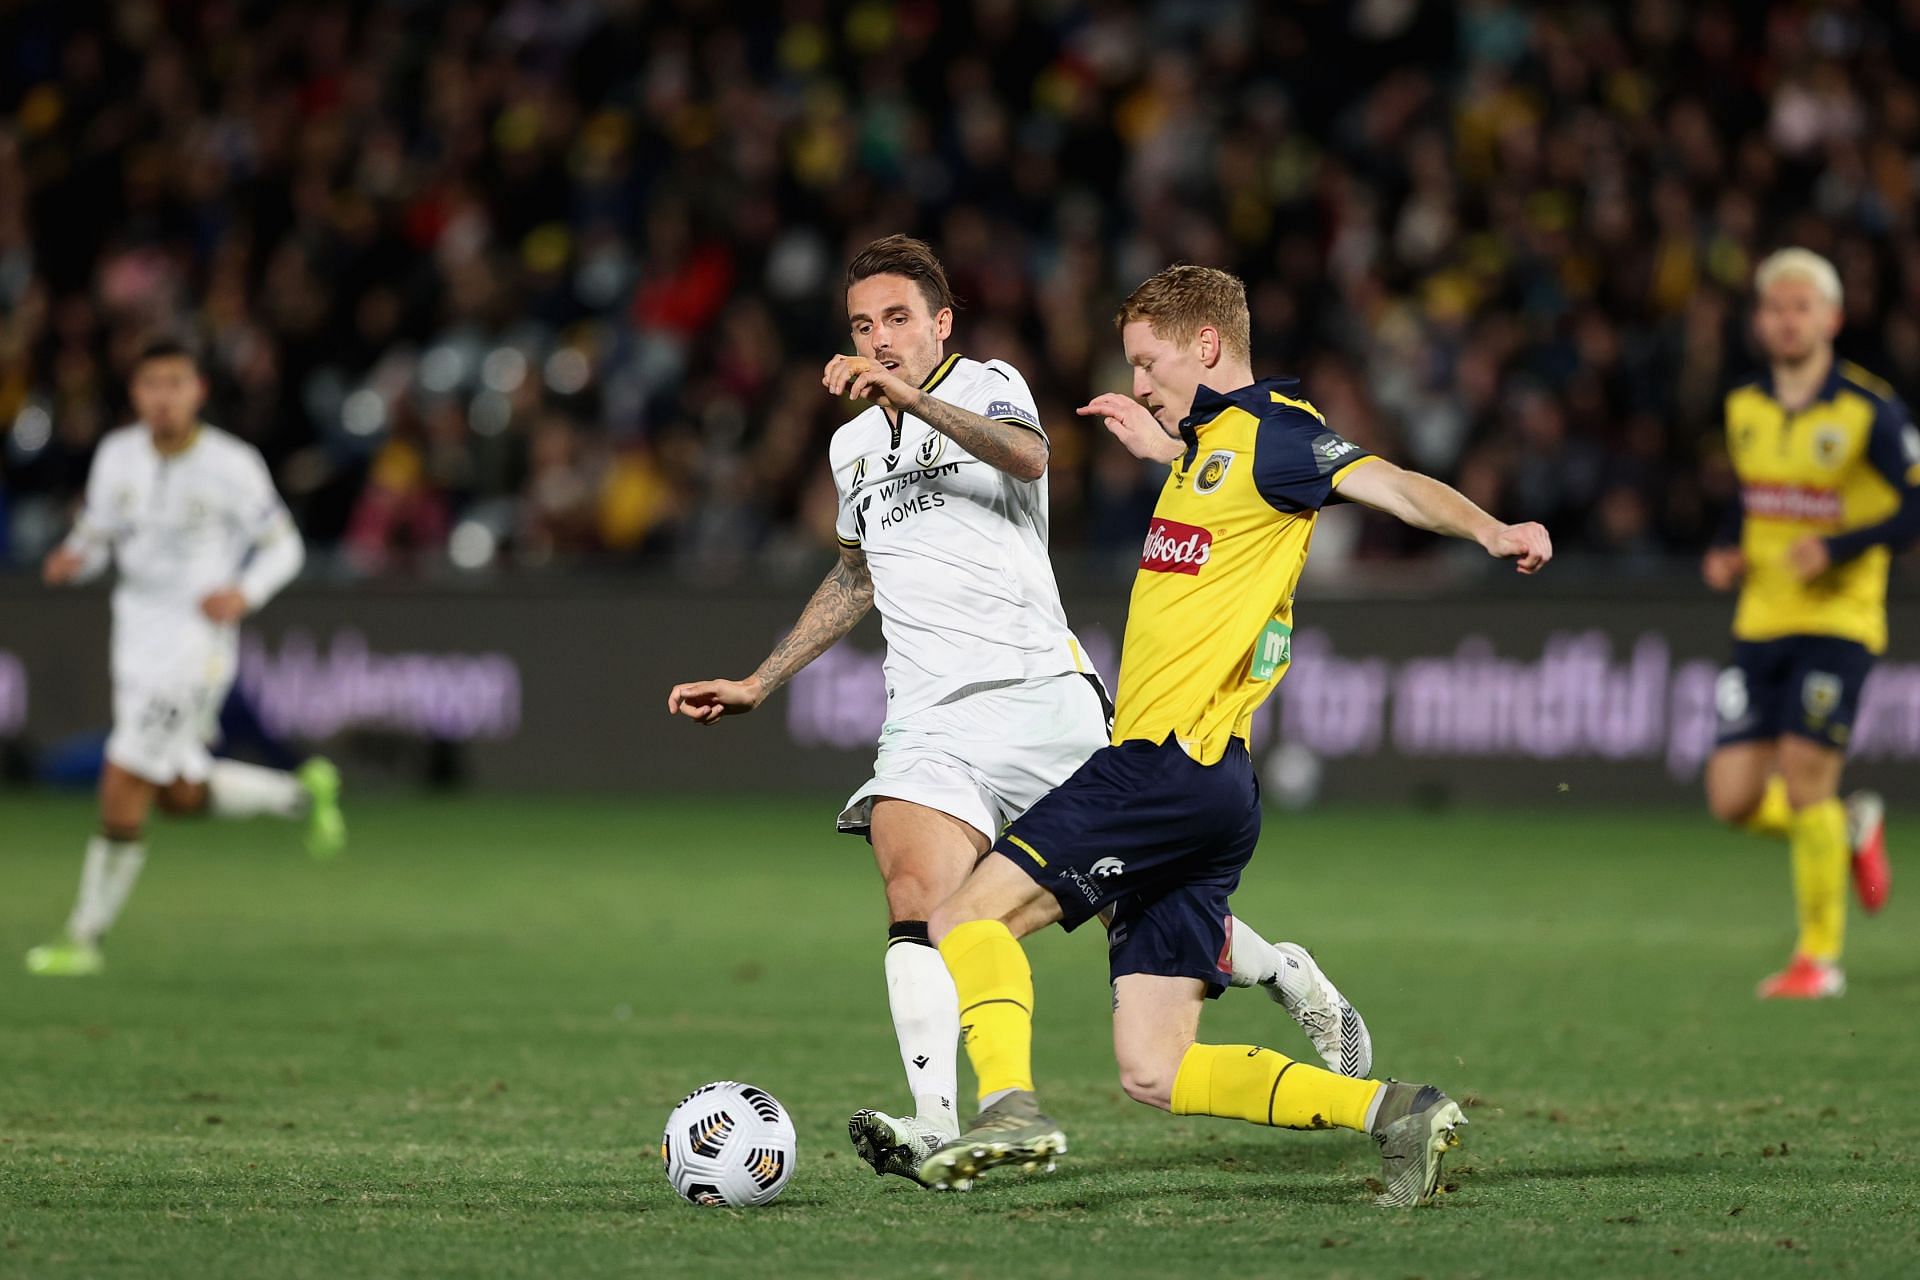 Central Coast Mariners take on Macarthur FC this weekend